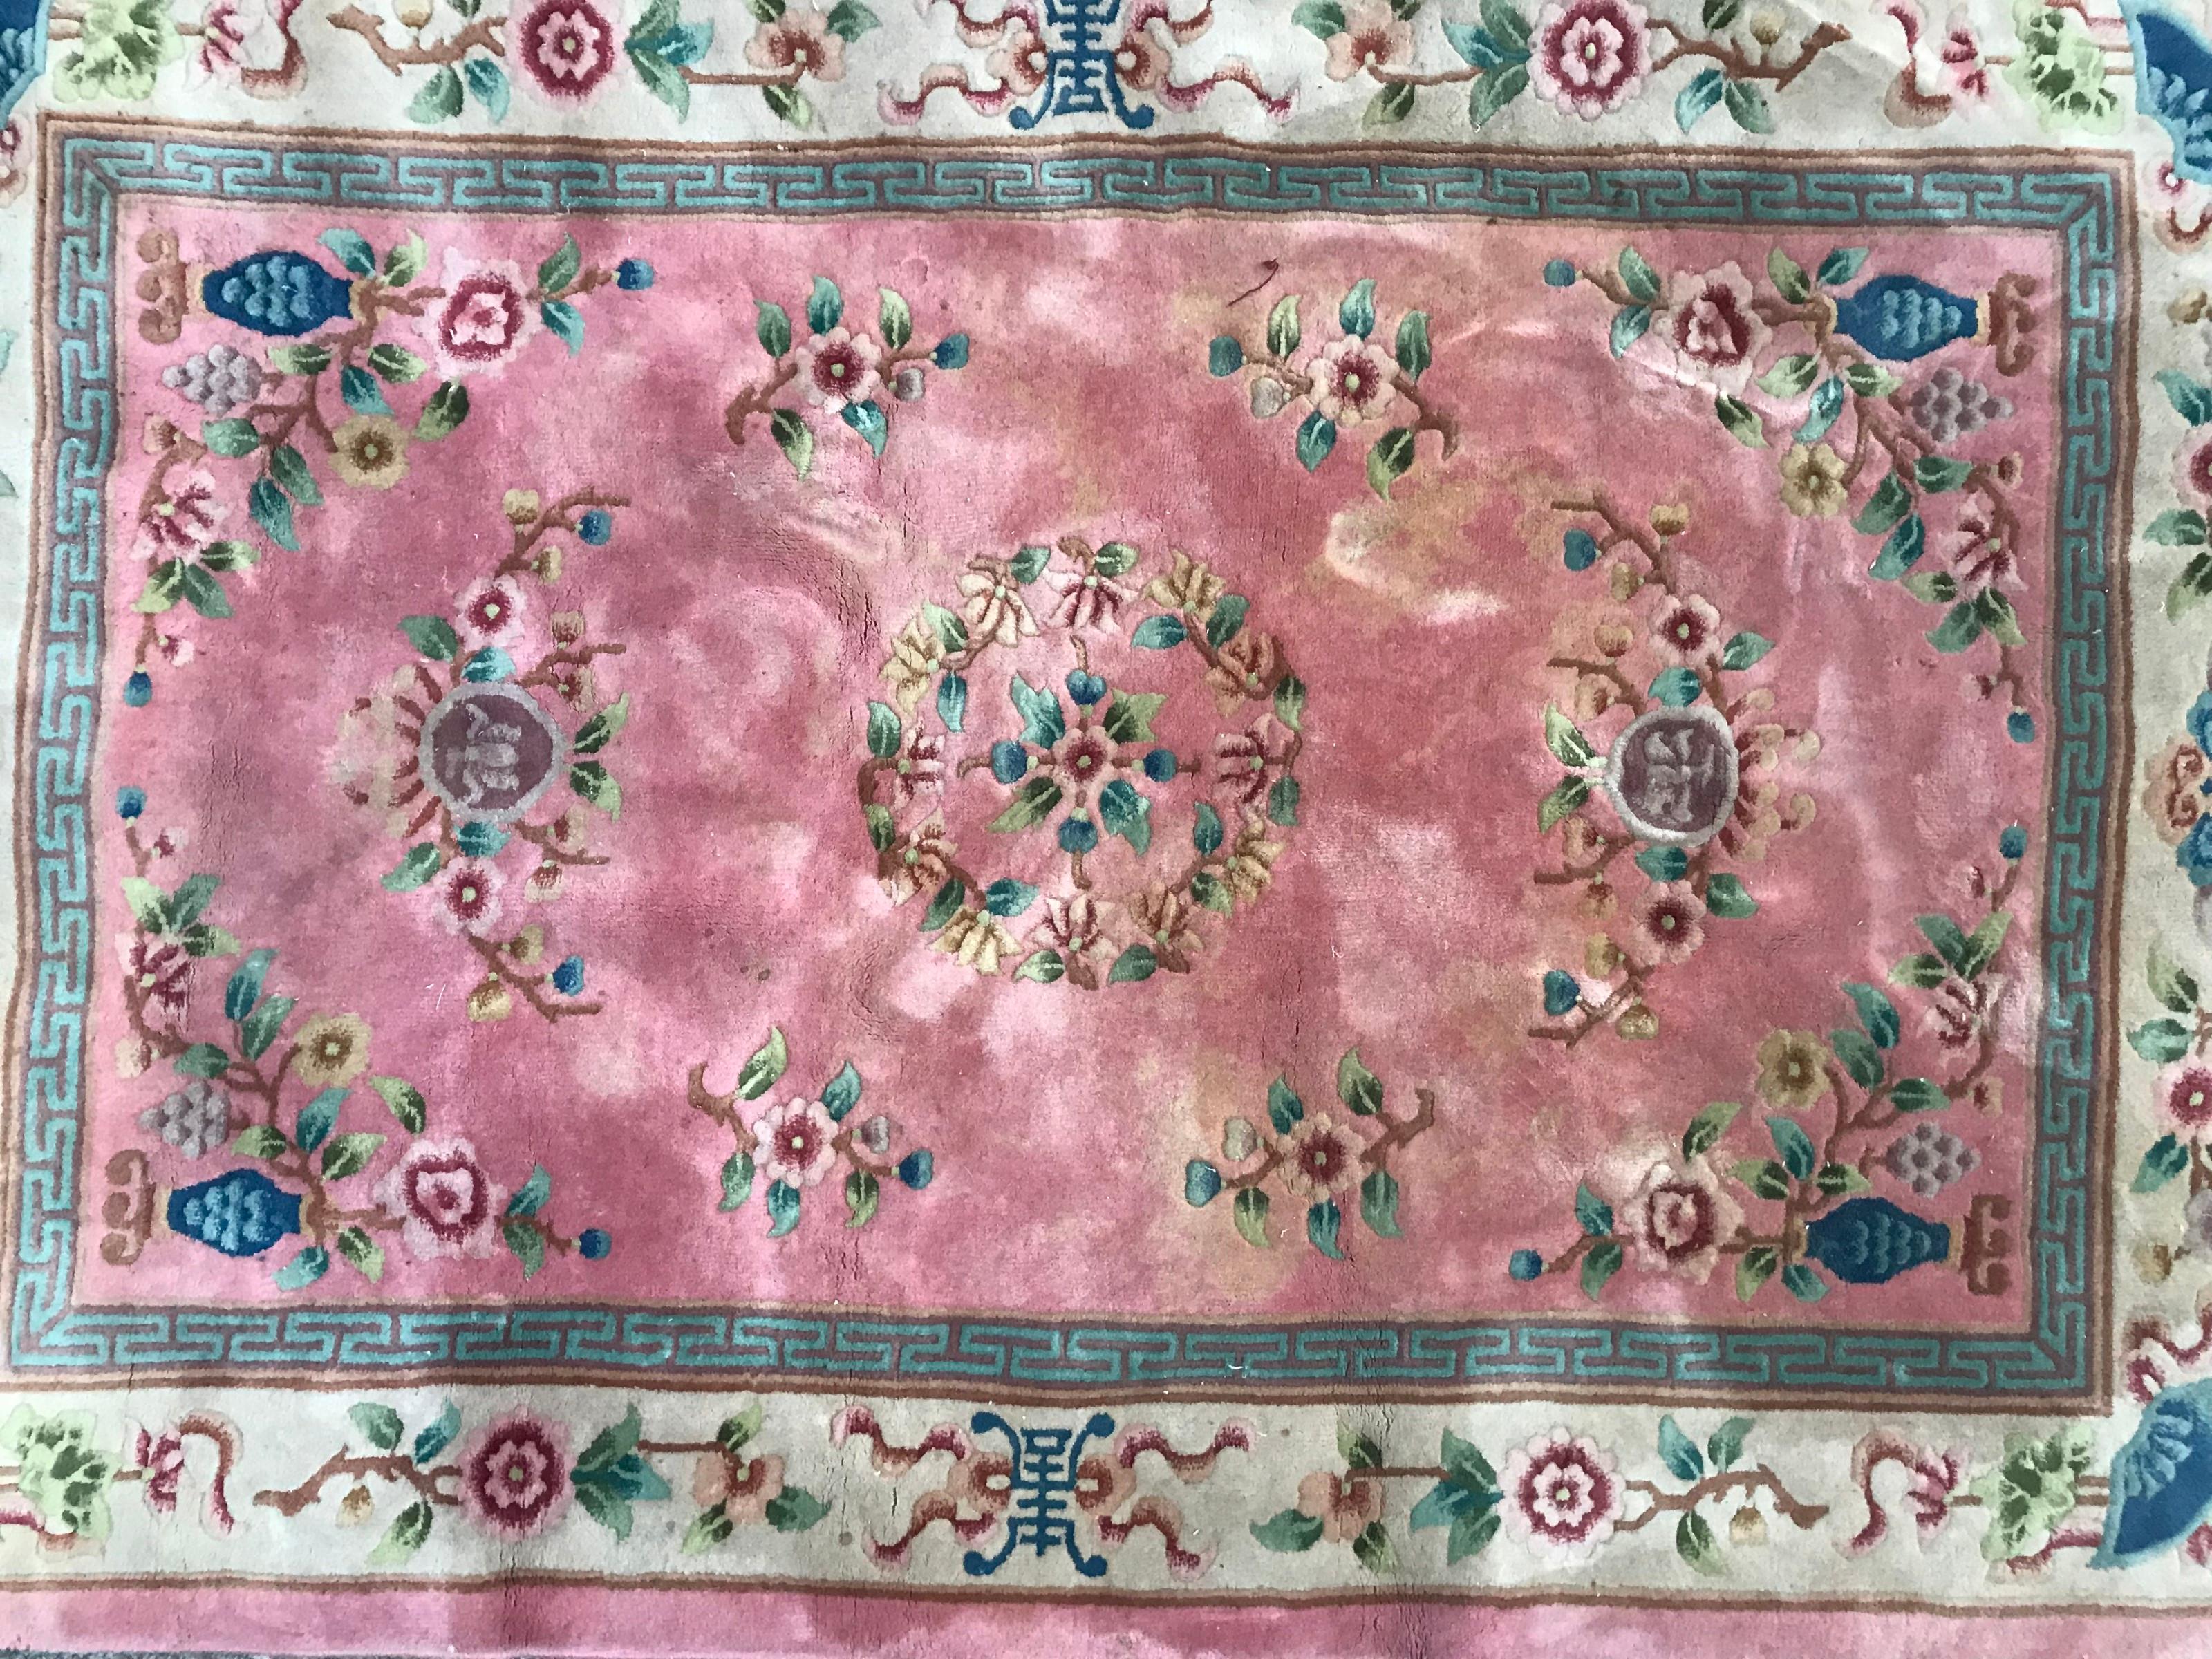 Nice 20th century Chinese rug with Chinese design and beautiful colors with pink, blue, yellow and green, entirely hand knotted with wool velvet on cotton foundations.

✨✨✨
